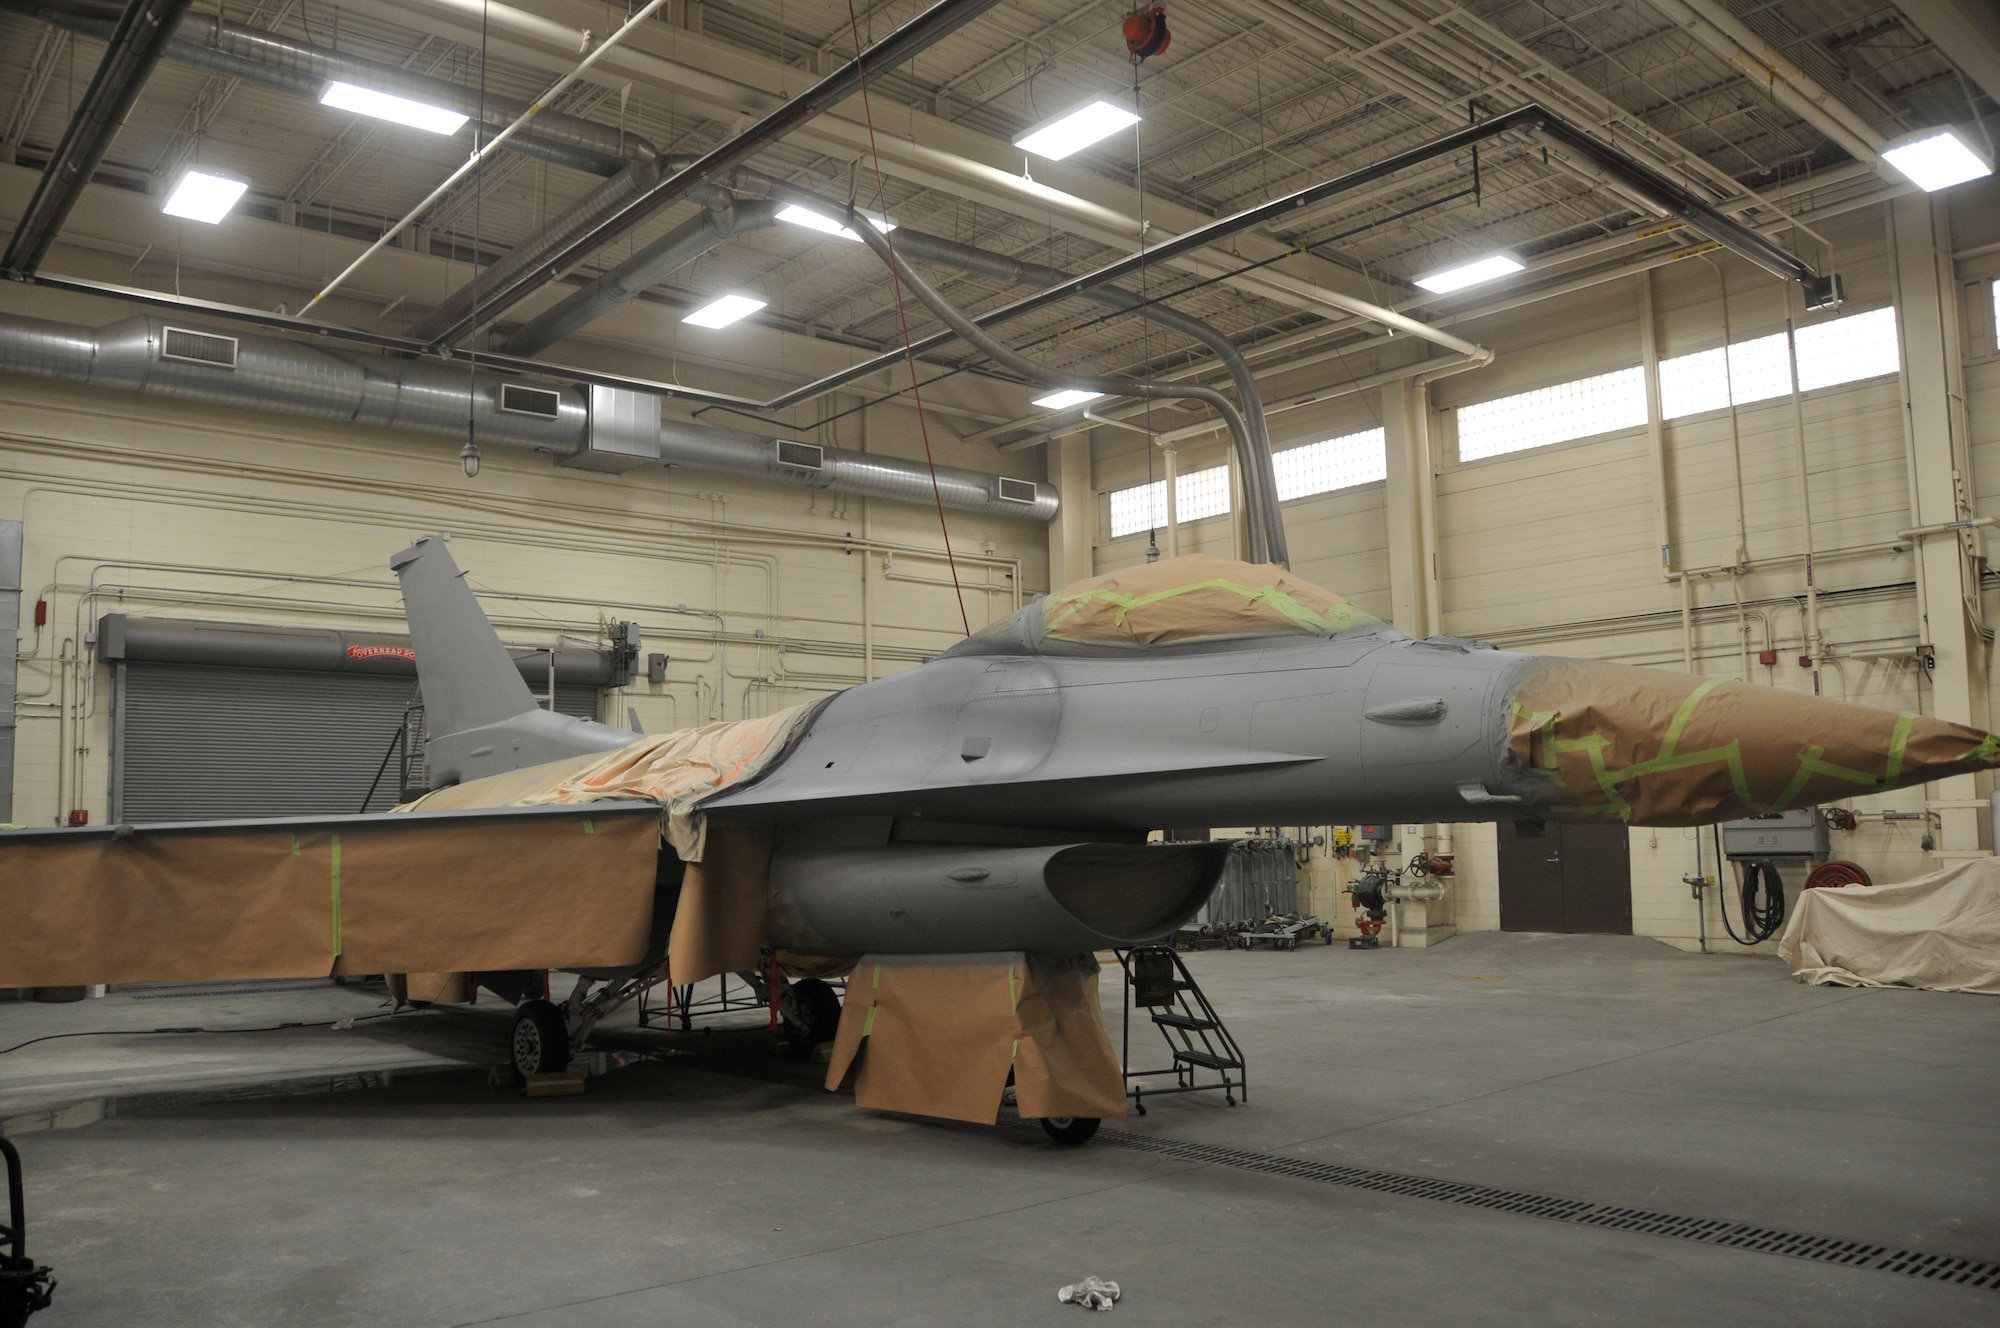 A Madison based F-16 stands ready to be painted on Sept. 18, 2010 at Truax Field.  The aircraft, which was acquired from the Ohio Air National Guard, is receiving its initial painting in the 115th colors. (Air National Guard photo by Staff Sergeant Stephen Montgomery)

